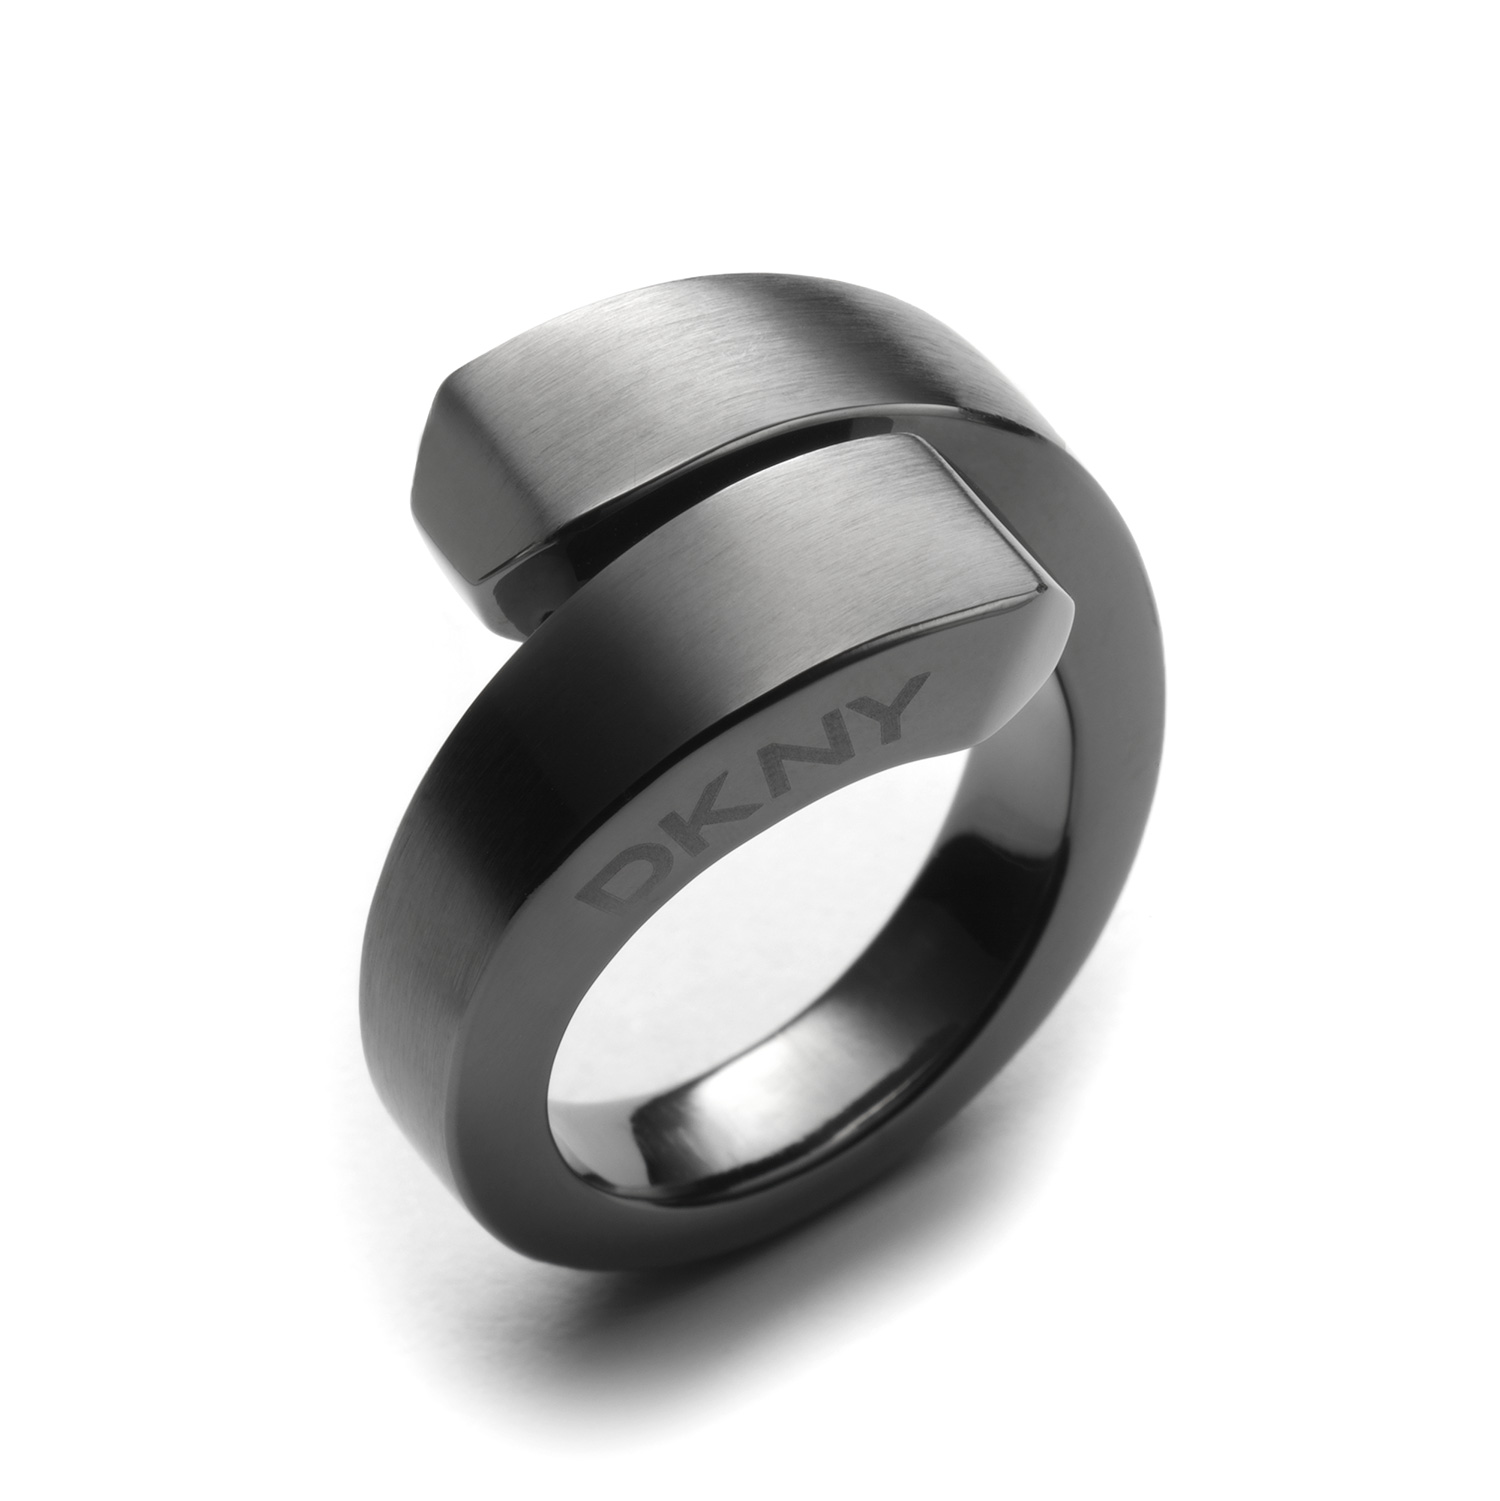 E Commerce Ring Photography https://www.alexhamphotography.com/